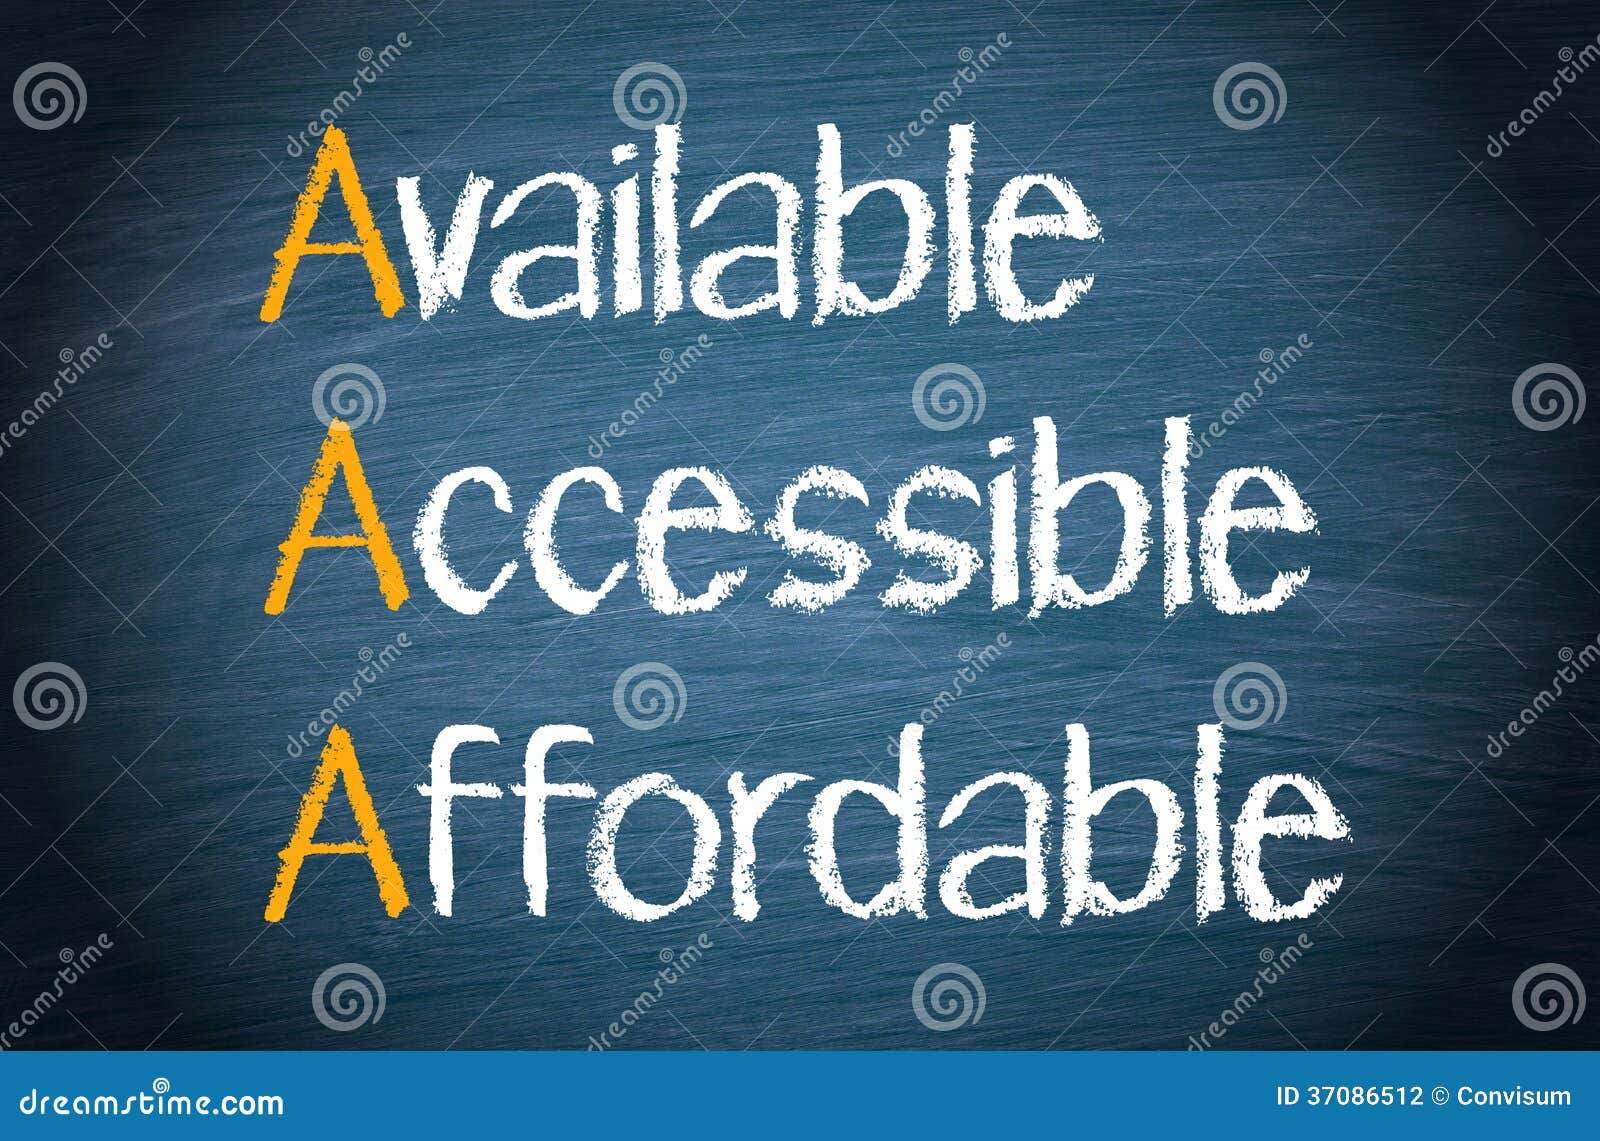 available, accessible and affordable